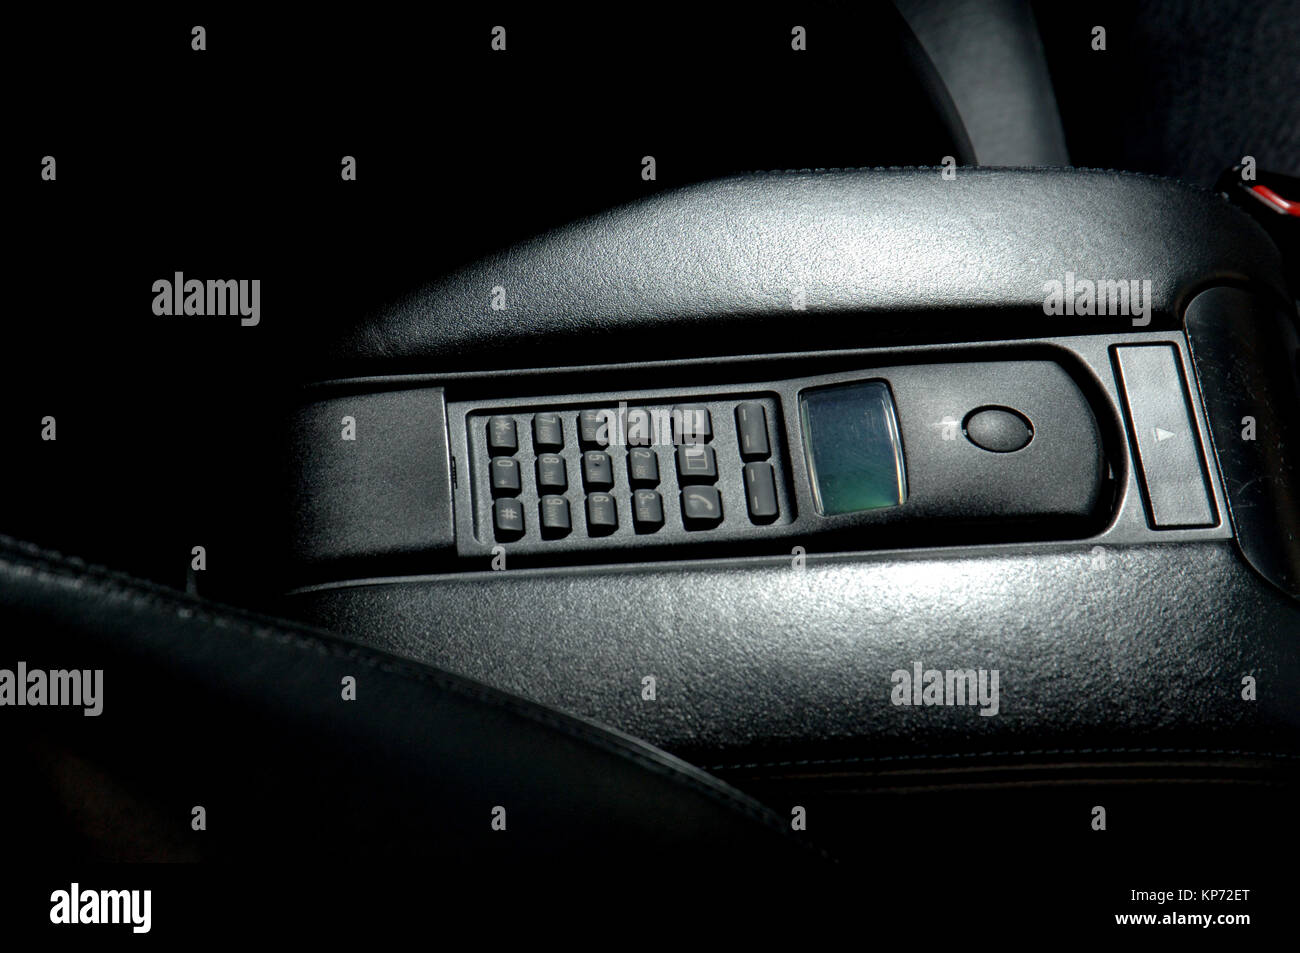 1990s or early 2000s car phone handset built into a BMW 7 Series German executive car Stock Photo